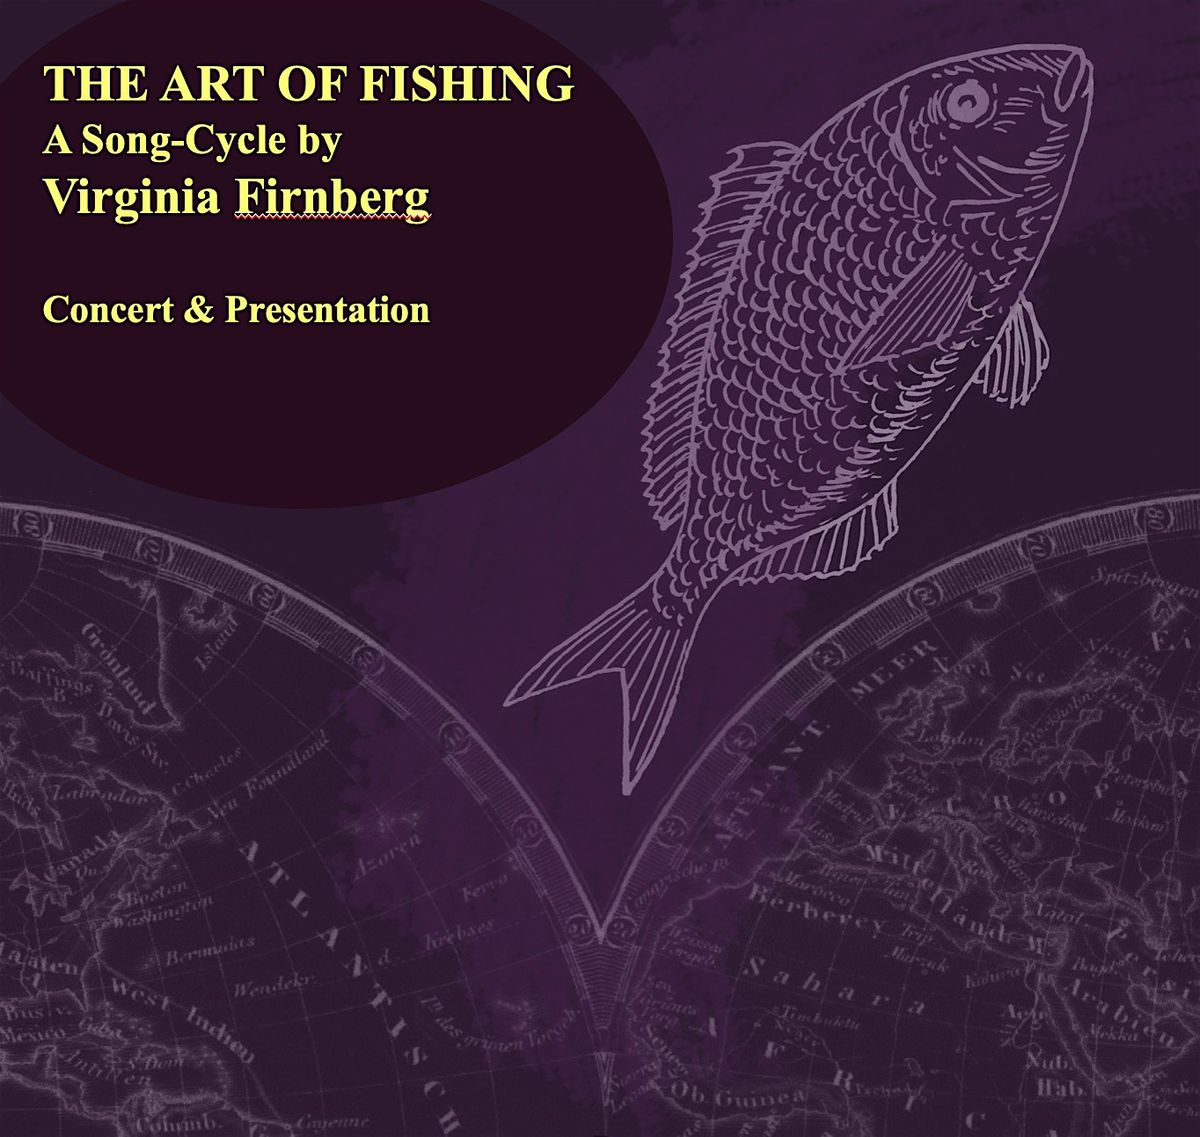 The Art of Fishing: Concert and Presentation